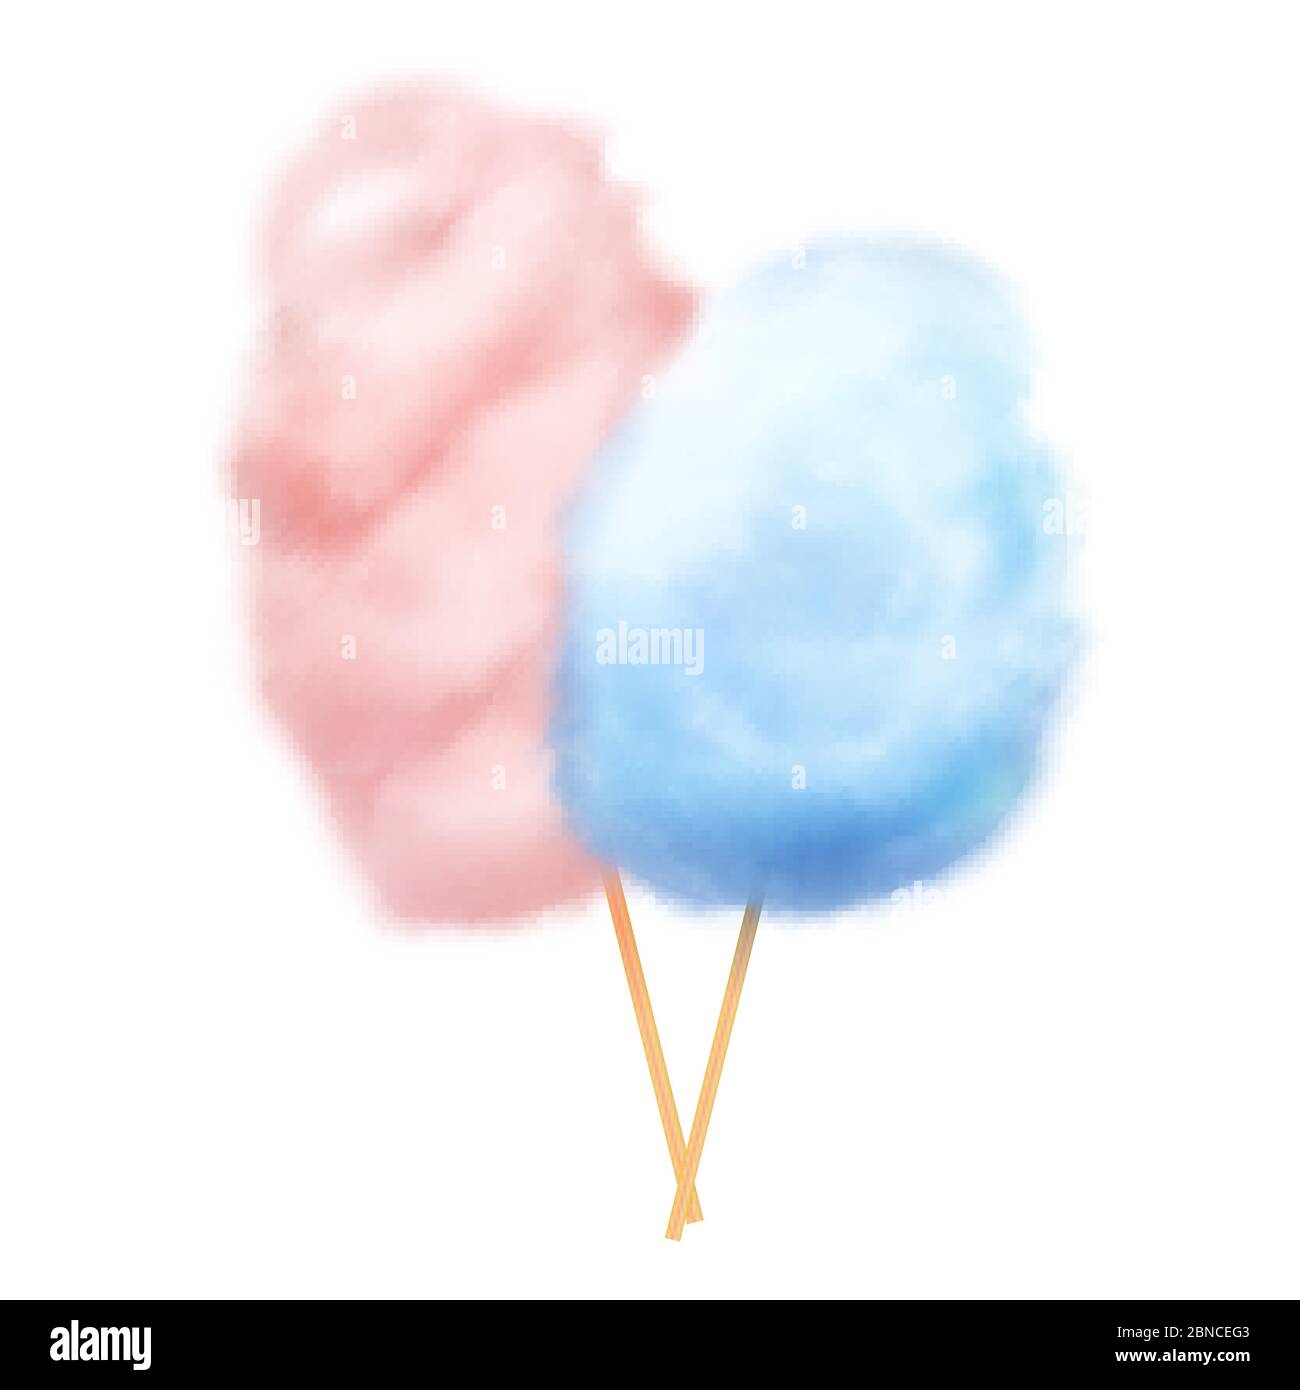 Pink and blue realistic cotton candies with stick vector illustration. Snack dessert sugar, candy cotton cloud Stock Vector